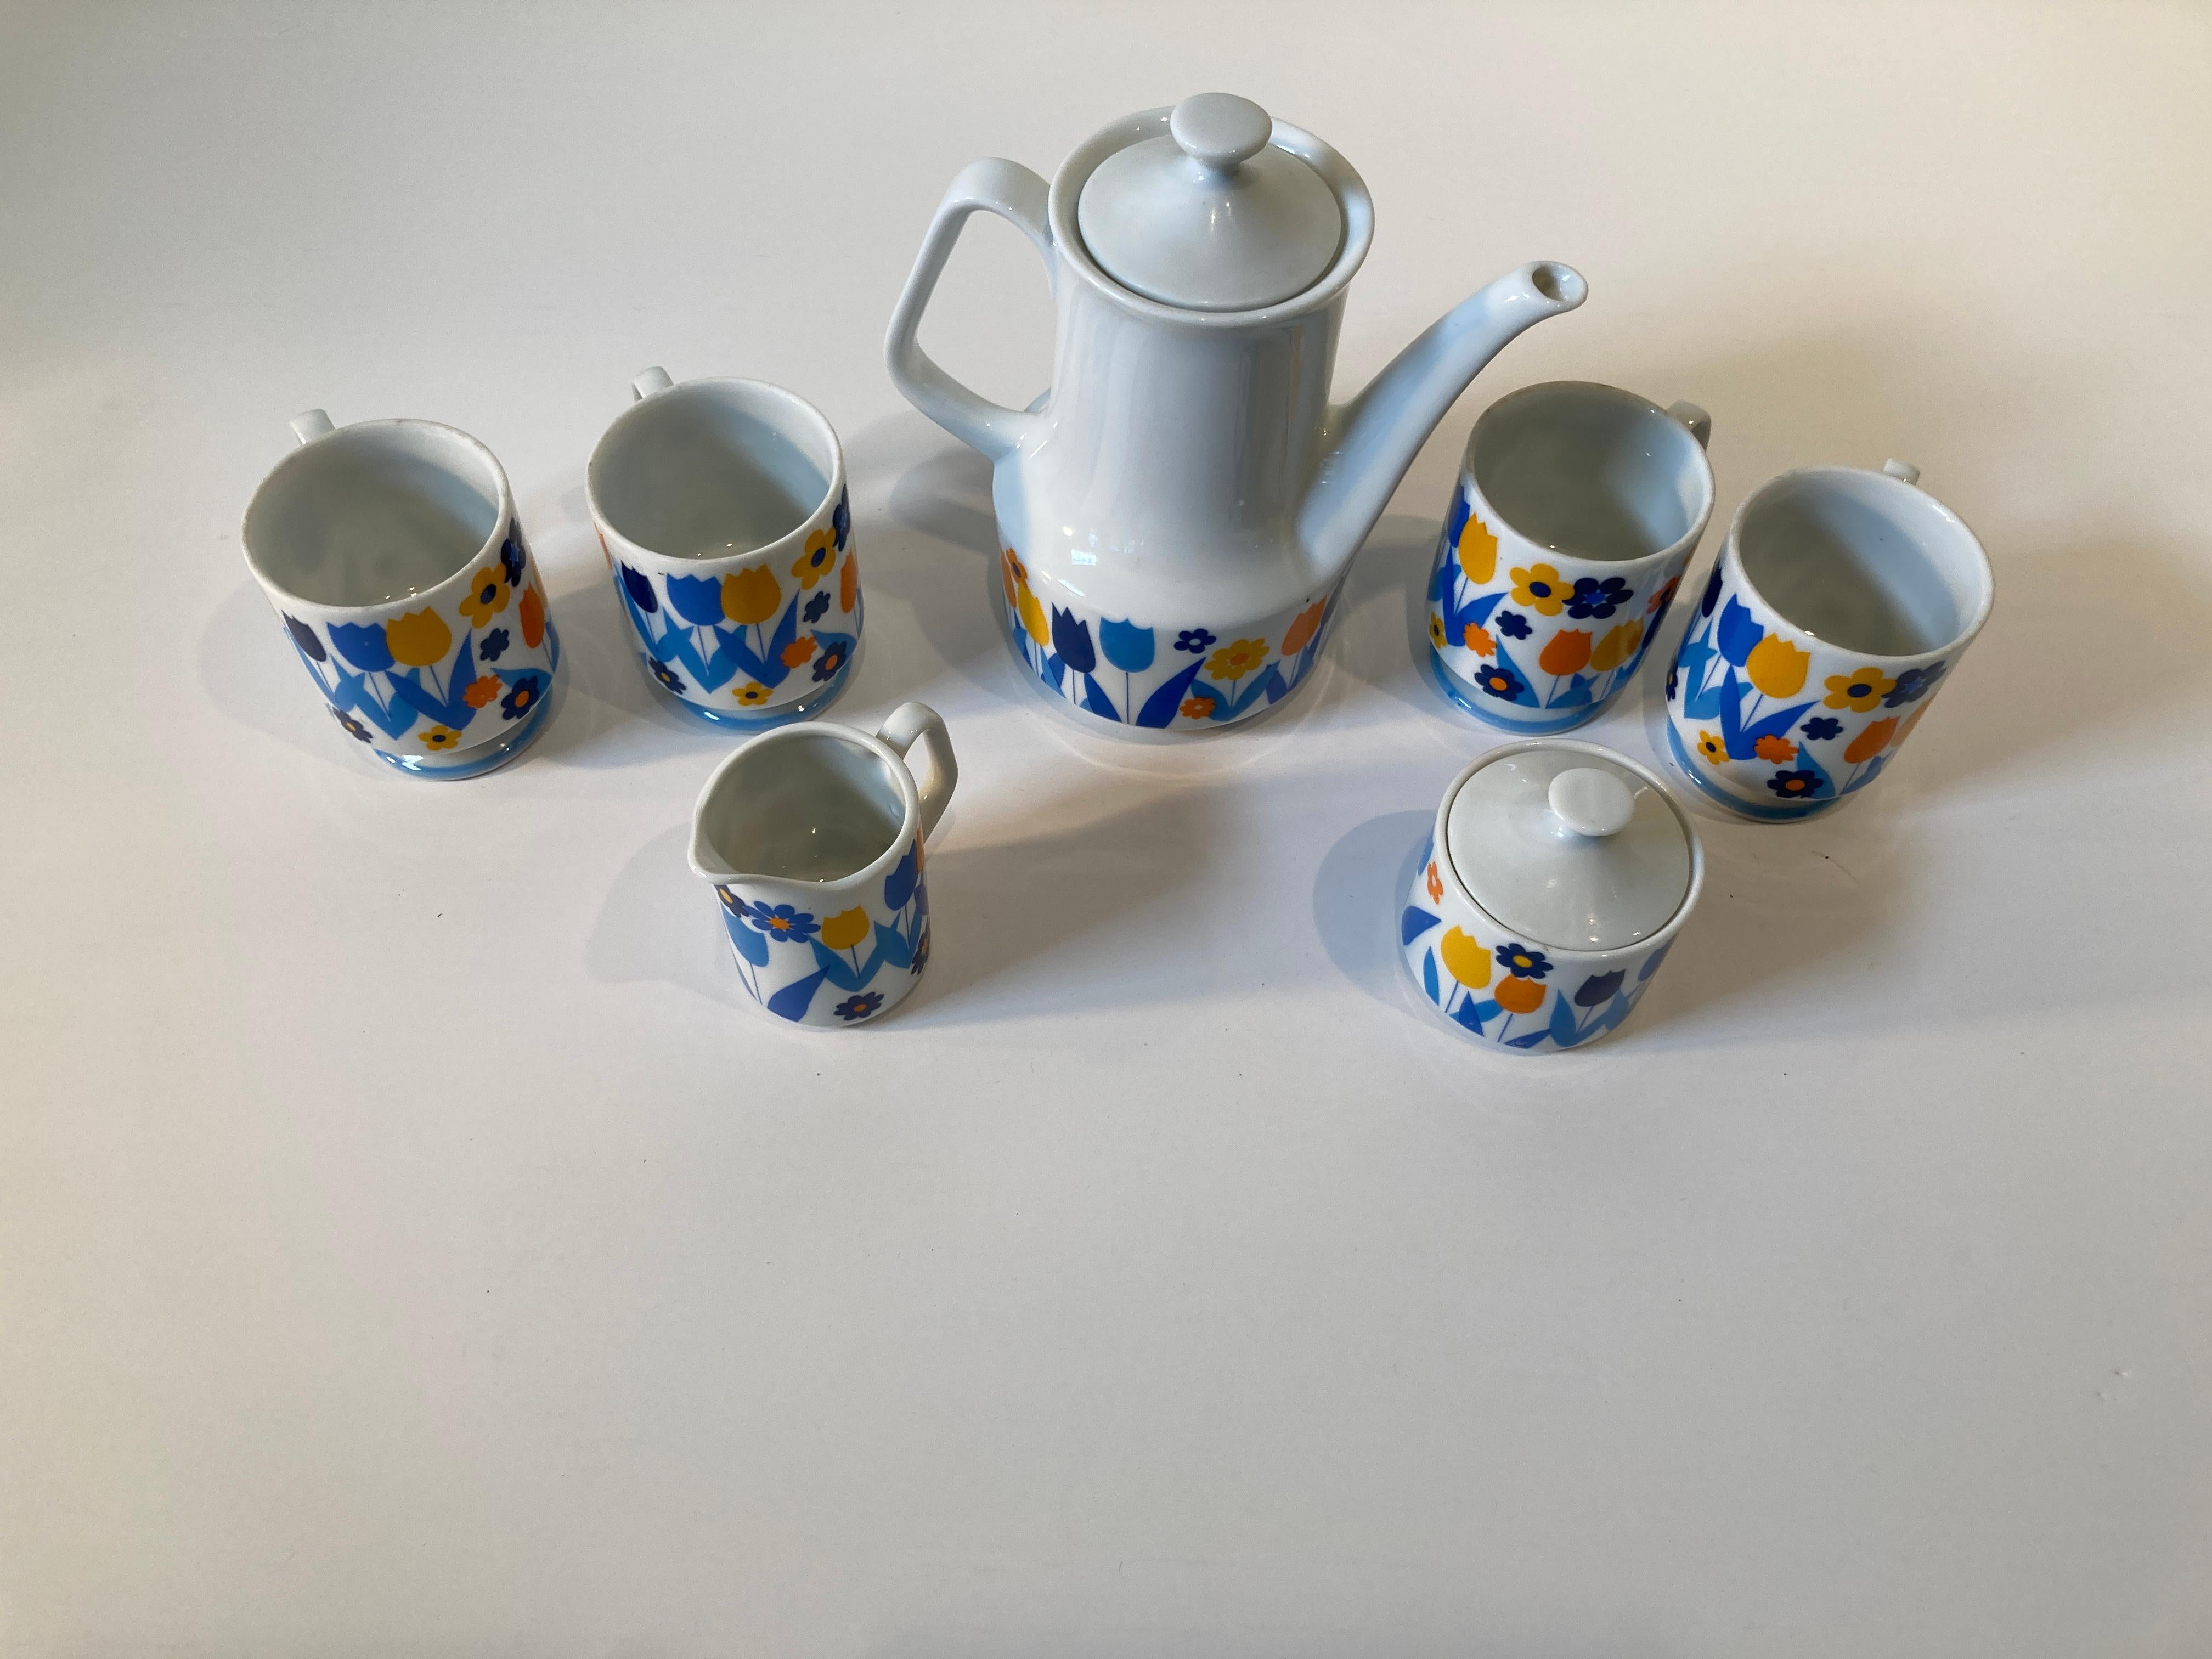 Vintage ENESCO JAPAN Mid Century Modern porcelain Coffee Set.
Beautiful set of 1 coffee or tea pot, 4 cups, sugar and creamer, in porcelain by Enesco Japan, in great condition no chips or cracks beautiful design.
Original 